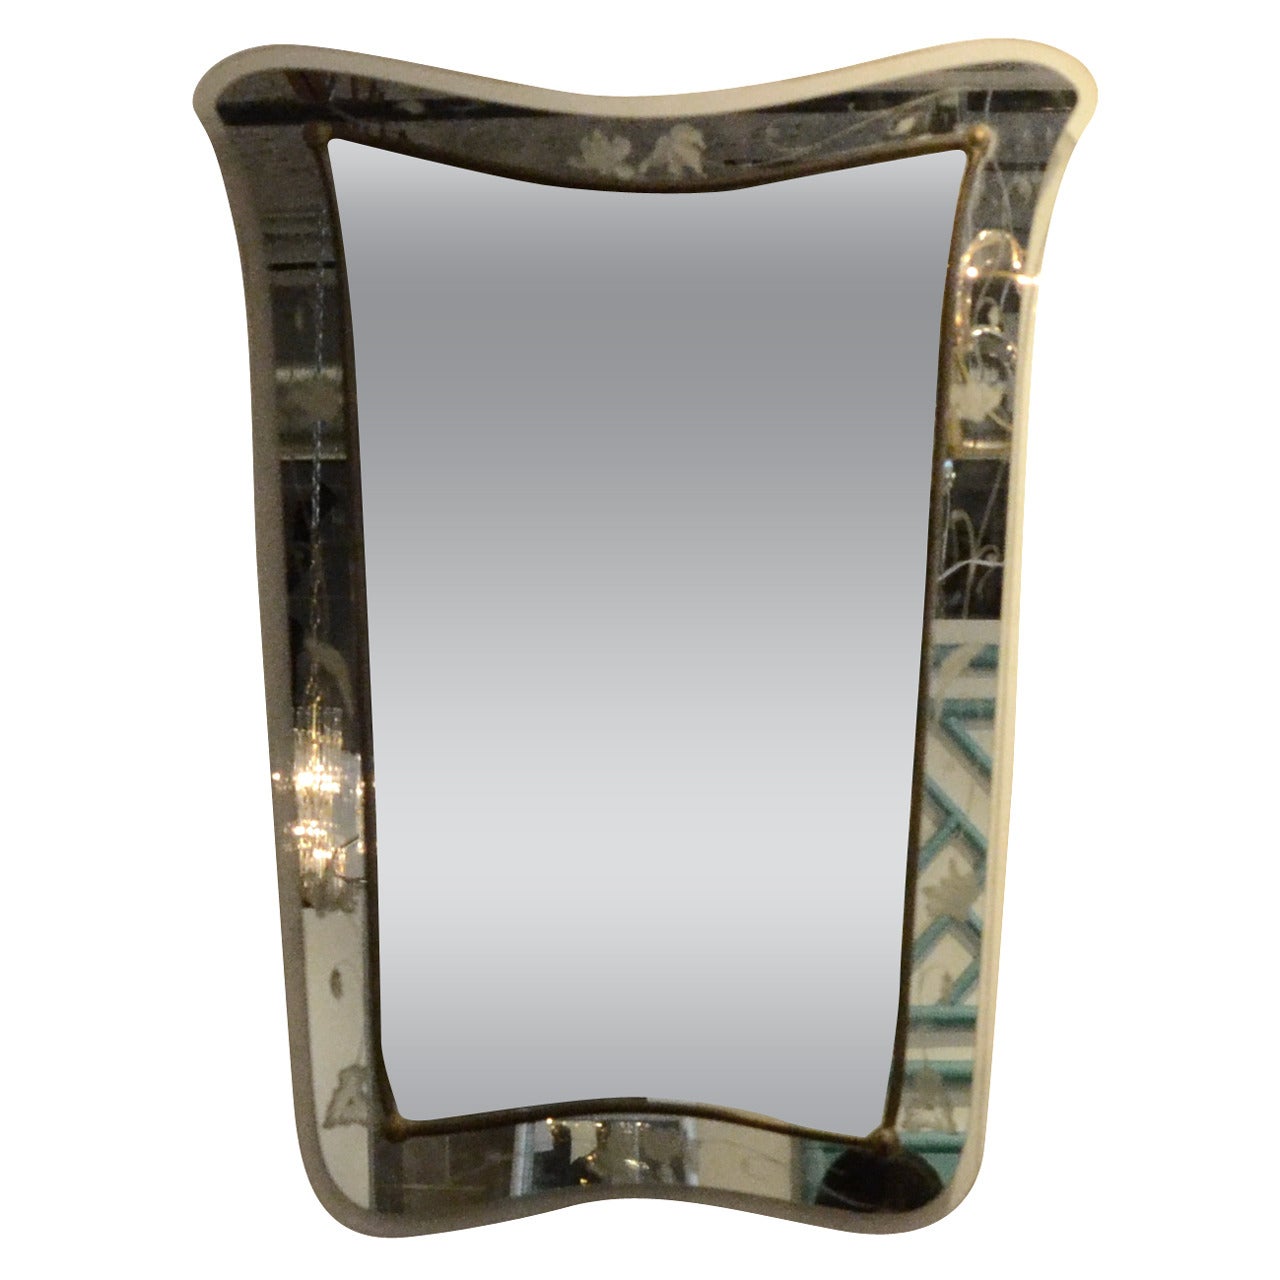 Offered is a Mid-Century Modern Italian Pietra Cheisa Fontana Arte style etched glass mirror. This vintage Italian Mid-Century Modern Venetian etched glass decorative mirror is a lovely example of timeless Italian craftsmanship that is rich in